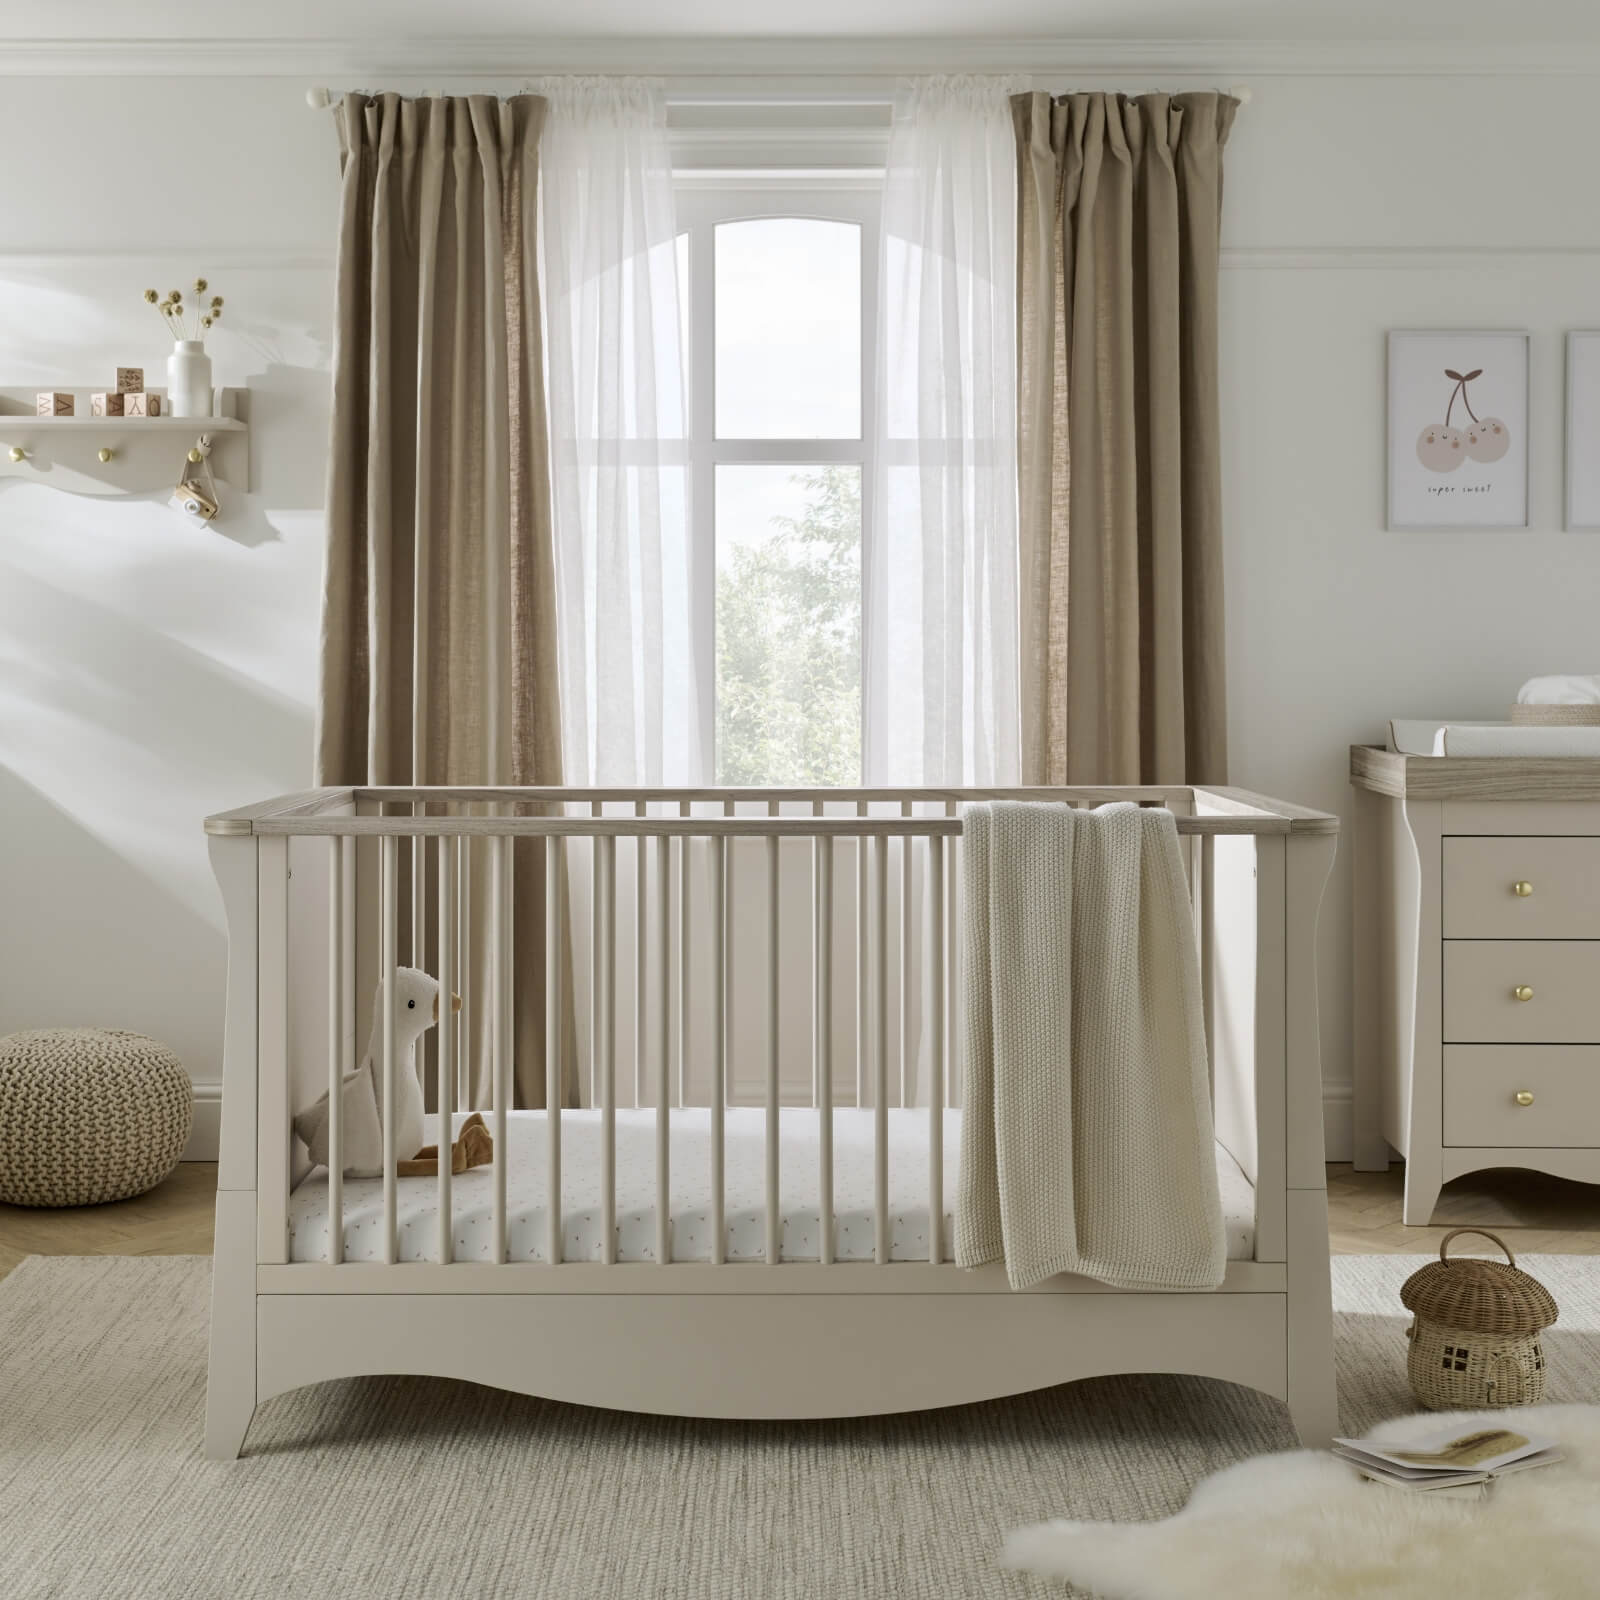 CuddleCo Clara Cot Bed in Cashmere Cot Beds